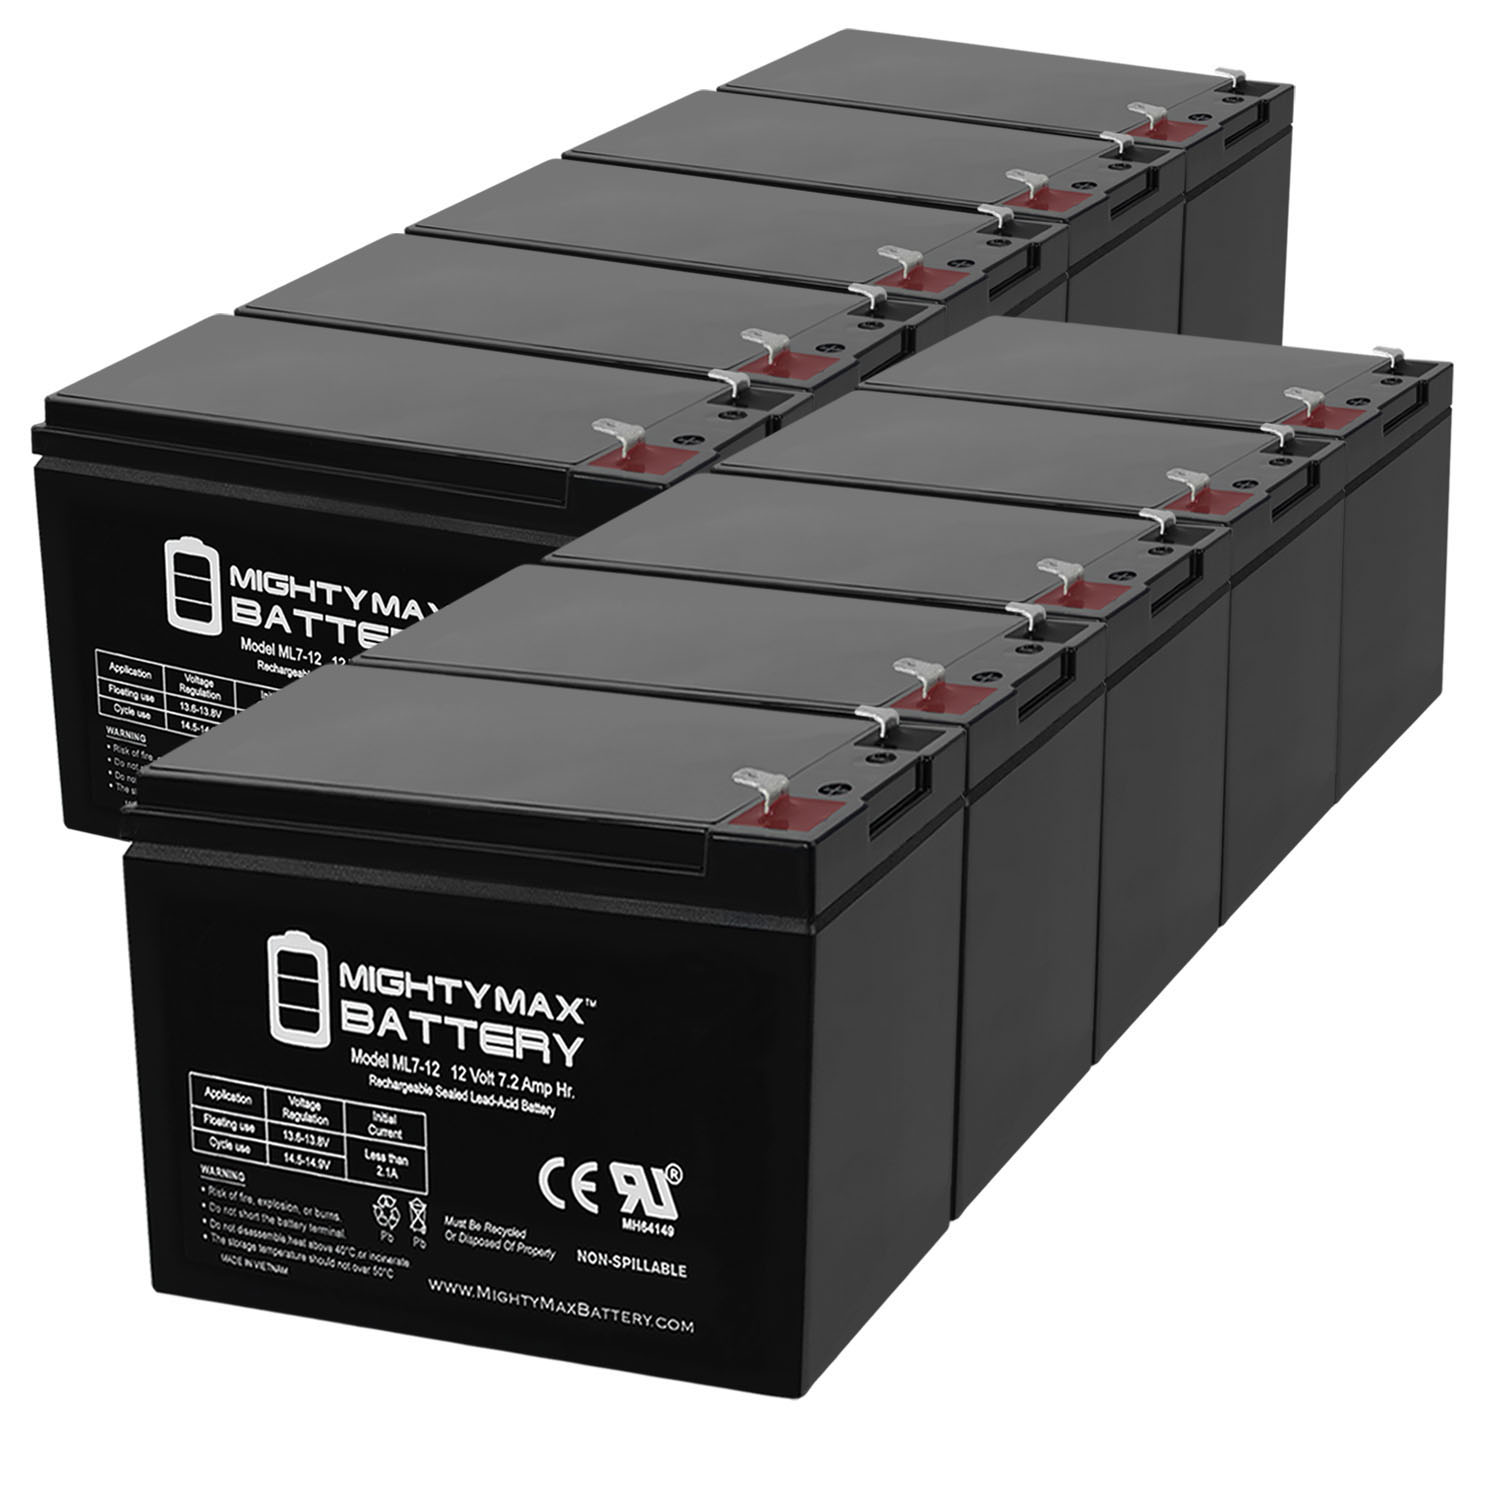 ML7-12 - 12V 7.2AH GS Portalac PX12072 Replacement Battery - 10 Pack